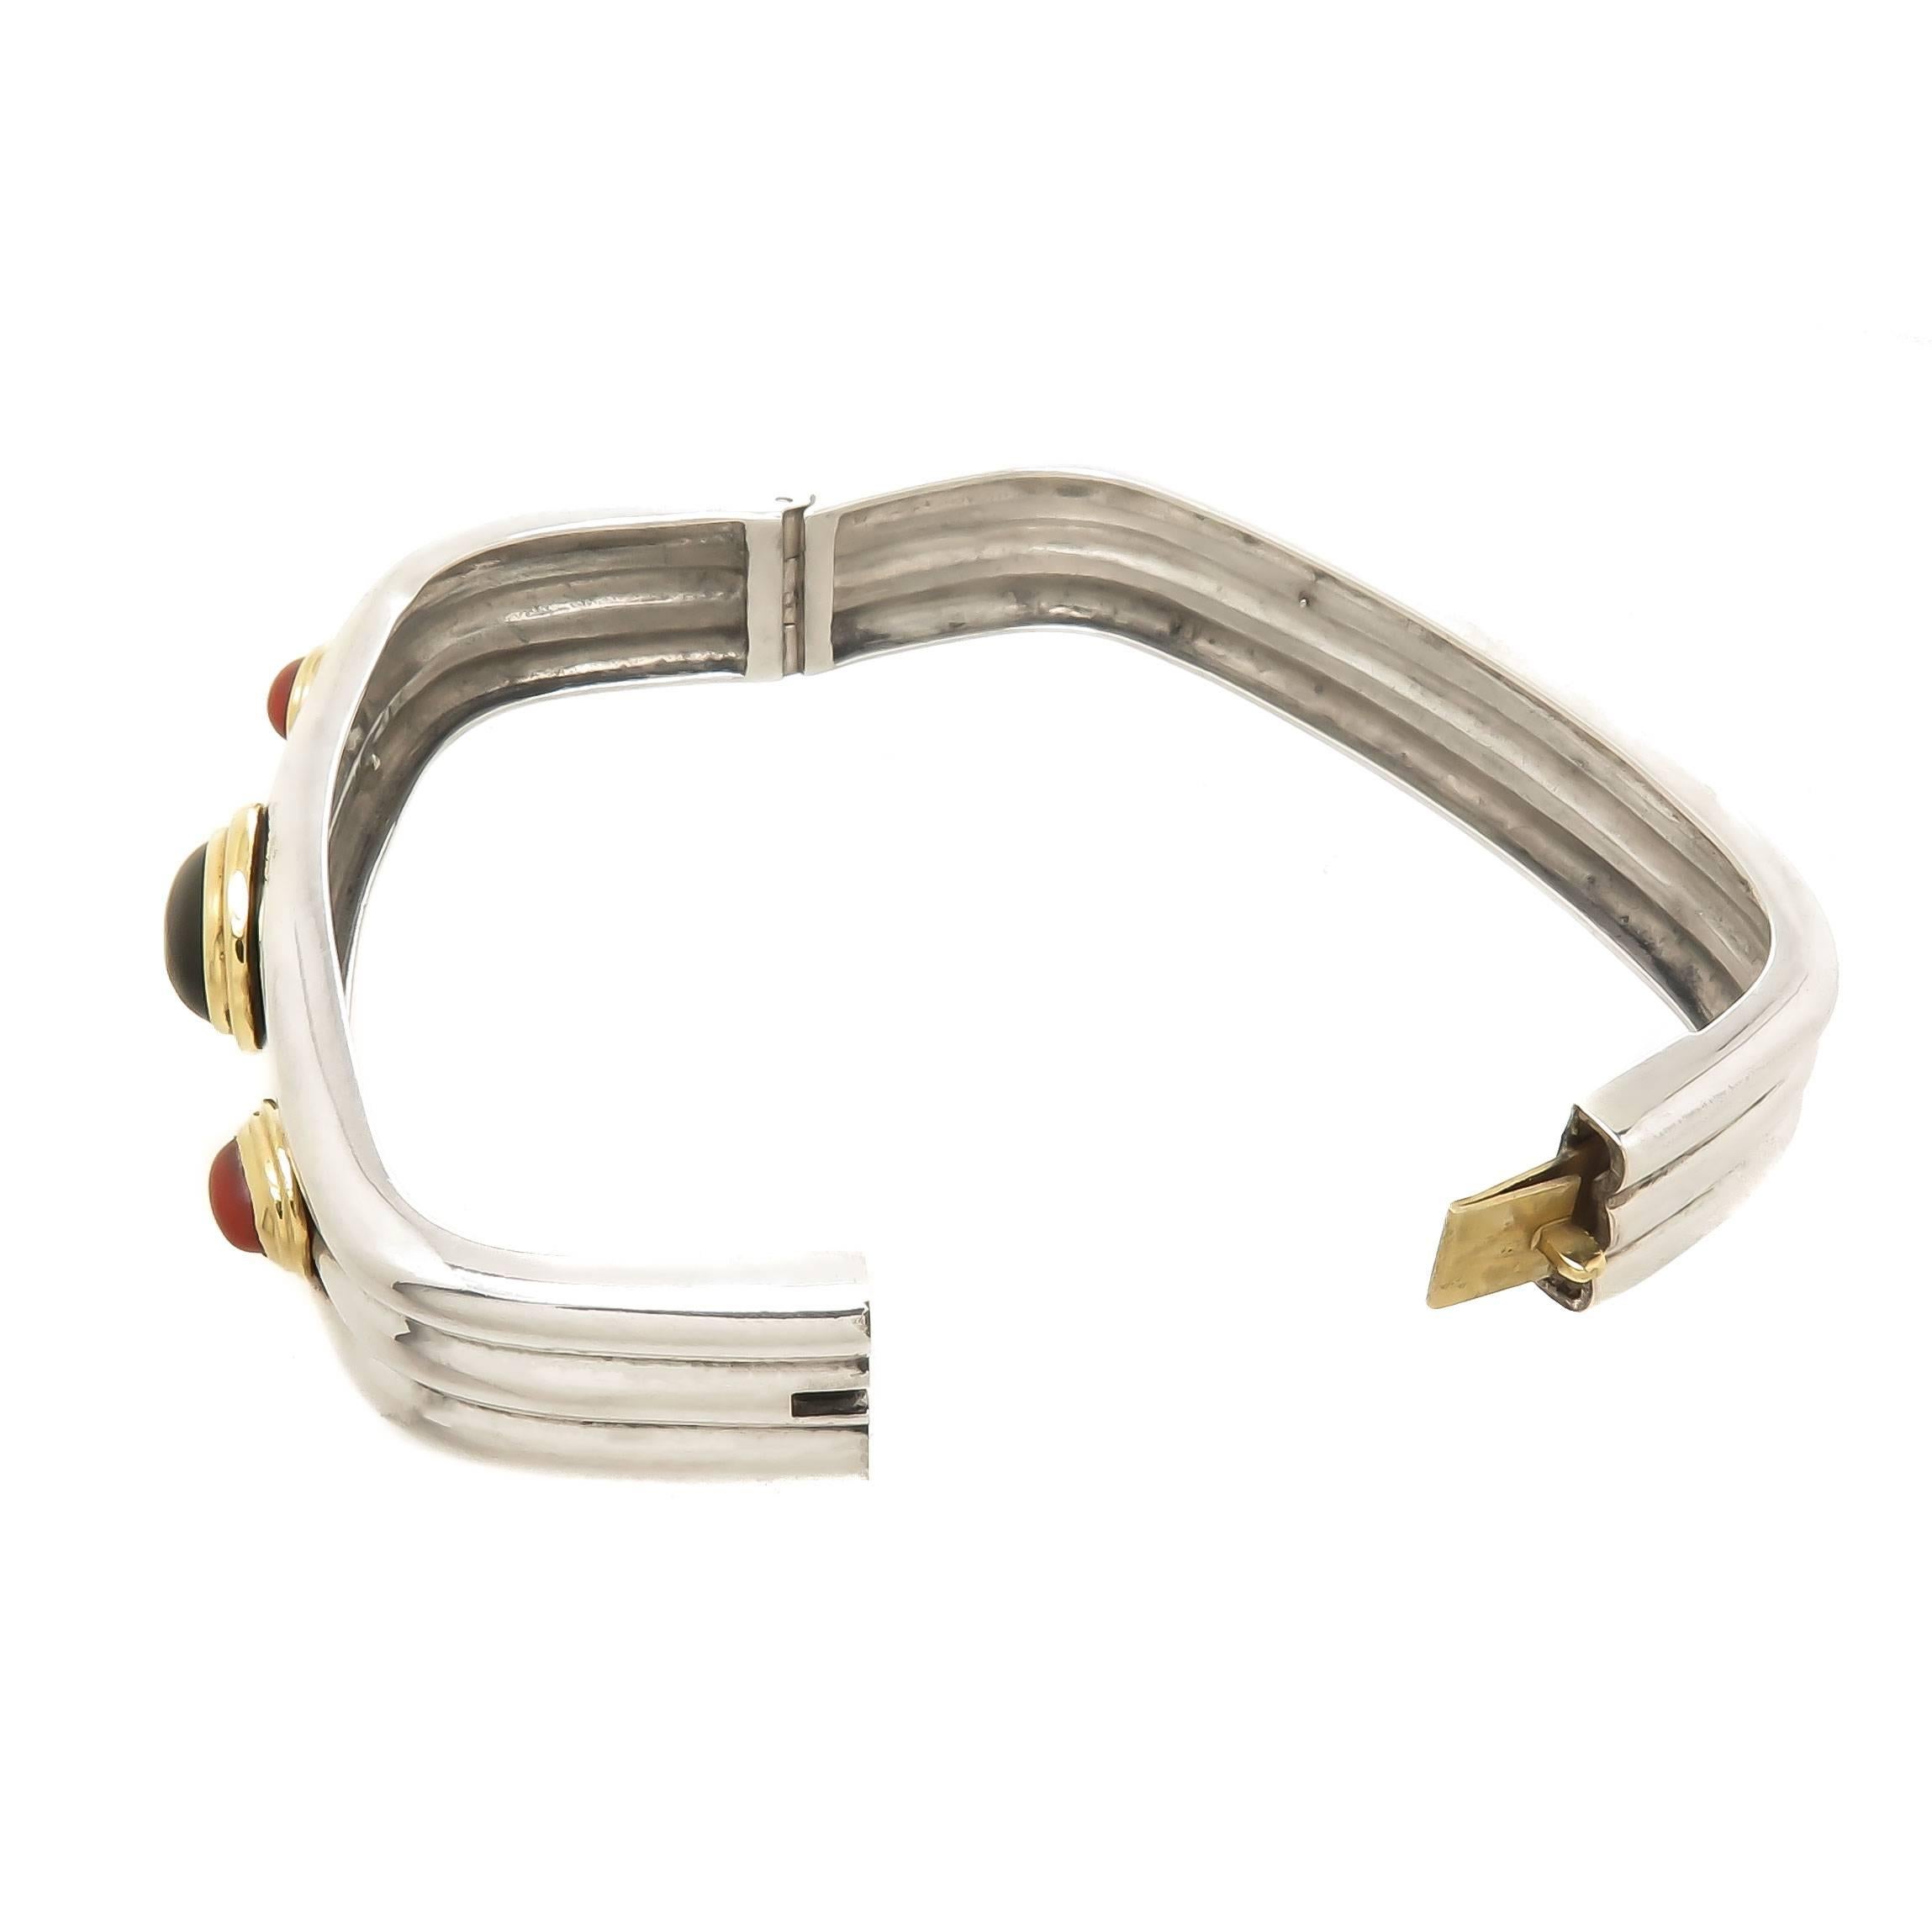 Circa 1970s Cartier Sterling Silver Bangle Bracelet, measuring 3/8 inch wide and having a ribbed design, 18K Yellow Gold bezel set Corals and Onyx. Inside measurement 6 1/2 inch.